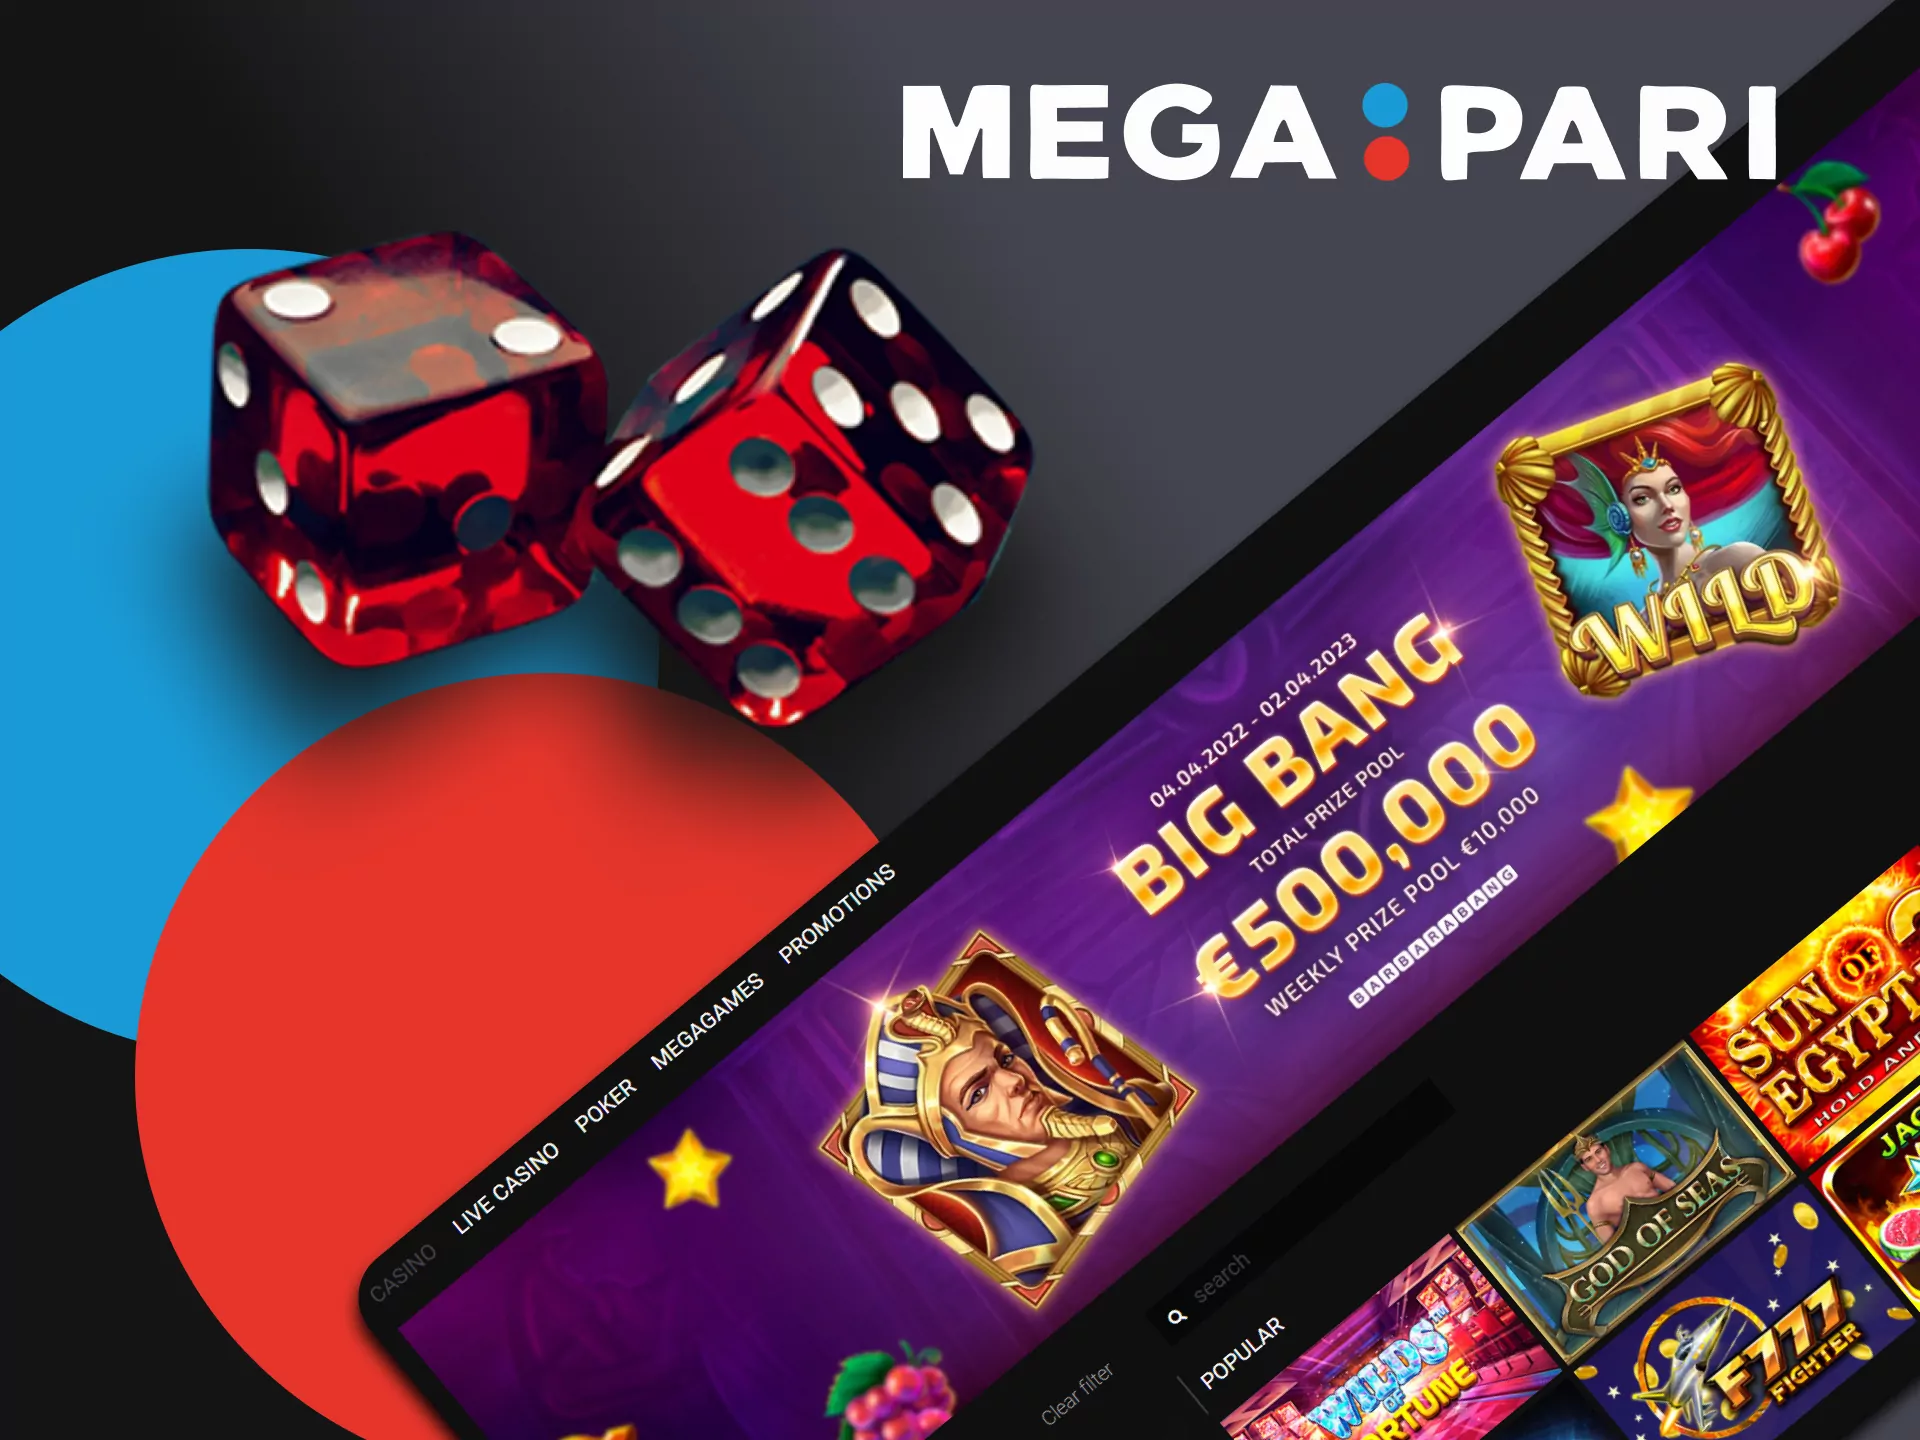 List of the best sides and achievements of Megapari casino.